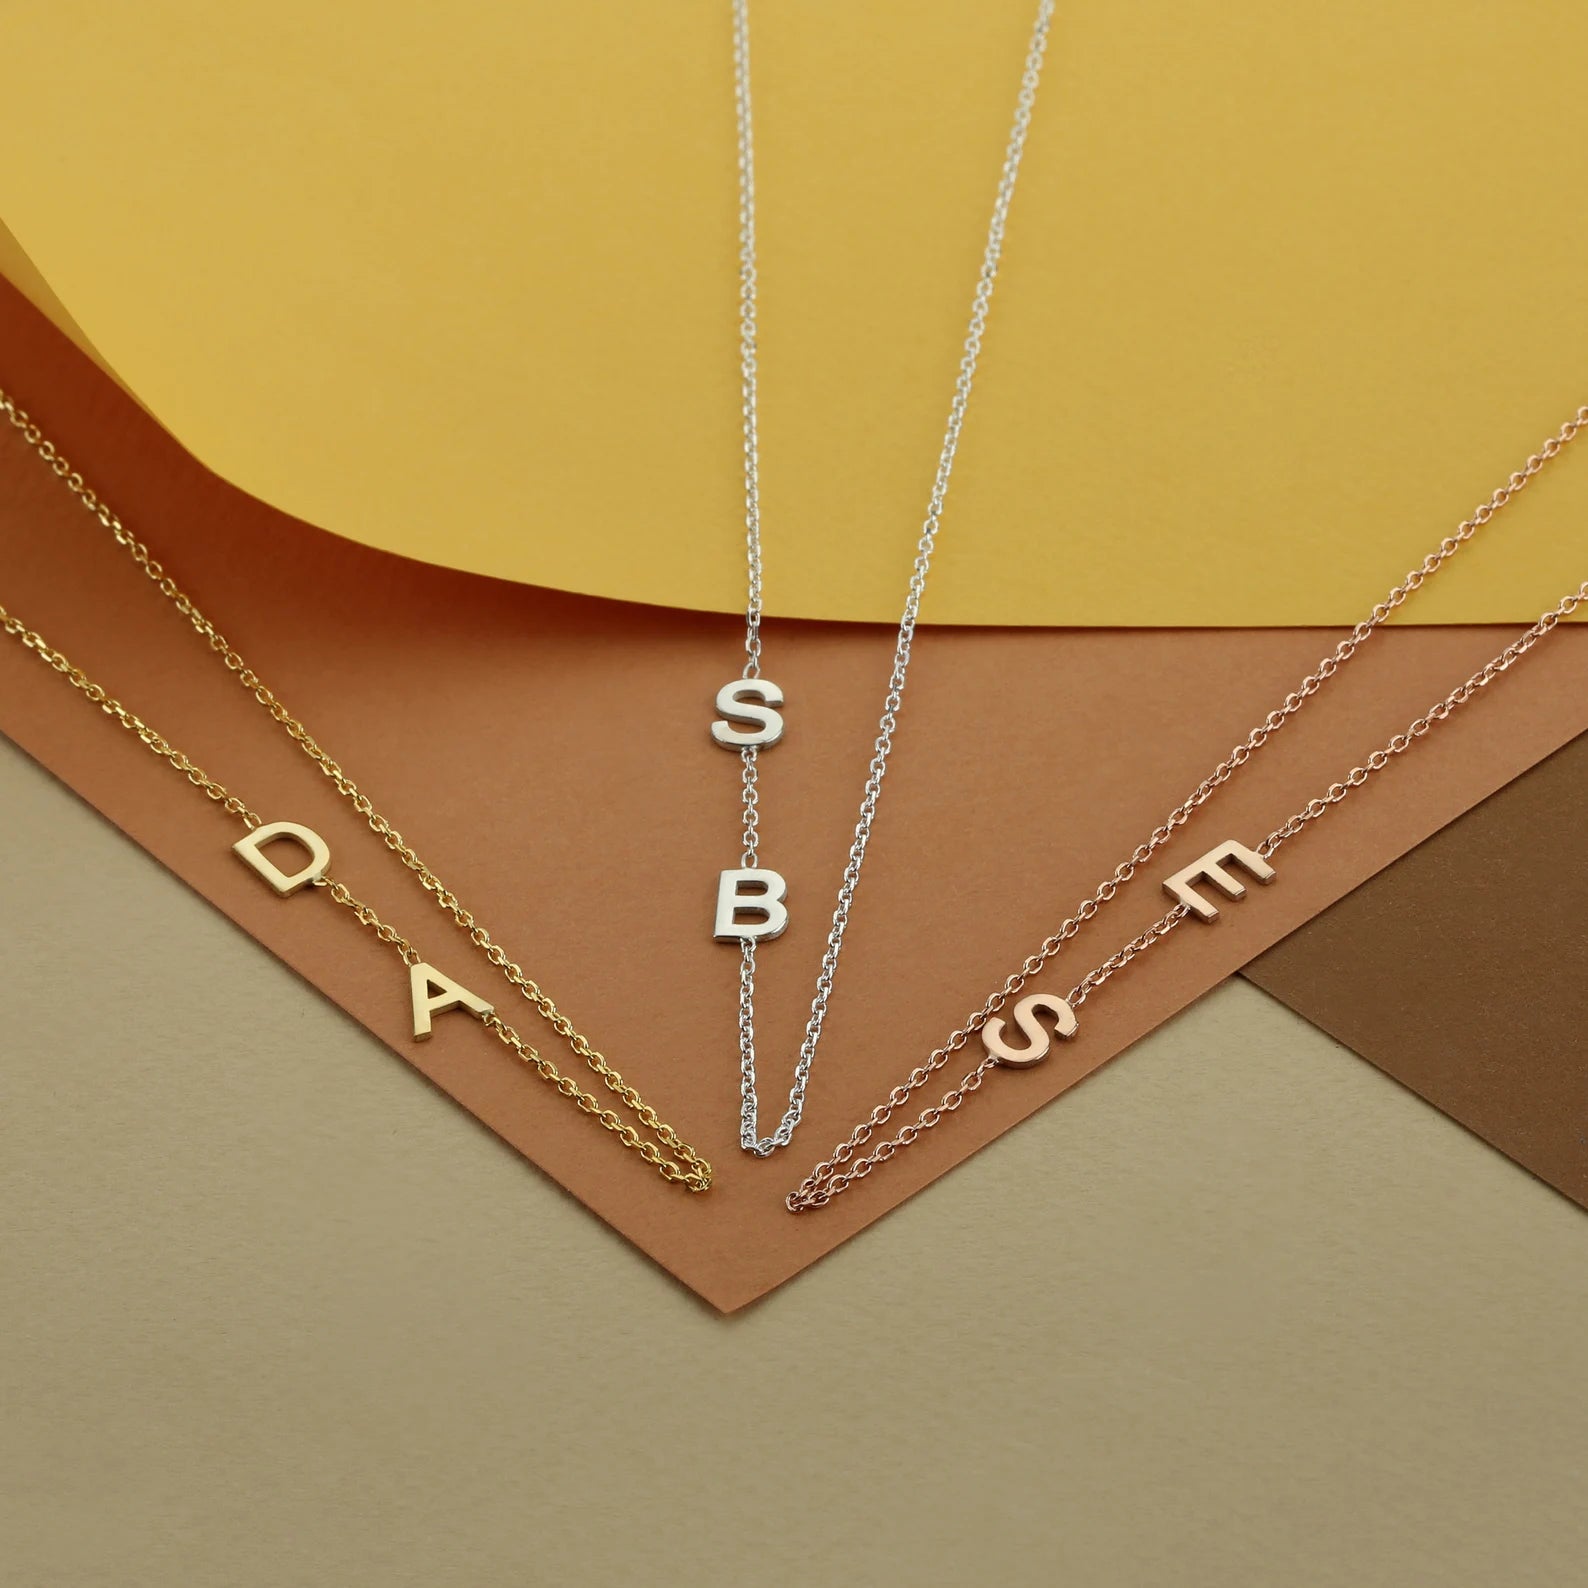 Trendy and elegant, this minimal gold alphabet pendant has a playful charm. This gold necklace is attached to a fine chain made of genuine solid gold and personalized with the initials of your choice. A great addition to your jewelry collection and a thoughtful gift for the loved ones. Designed in Dubai.